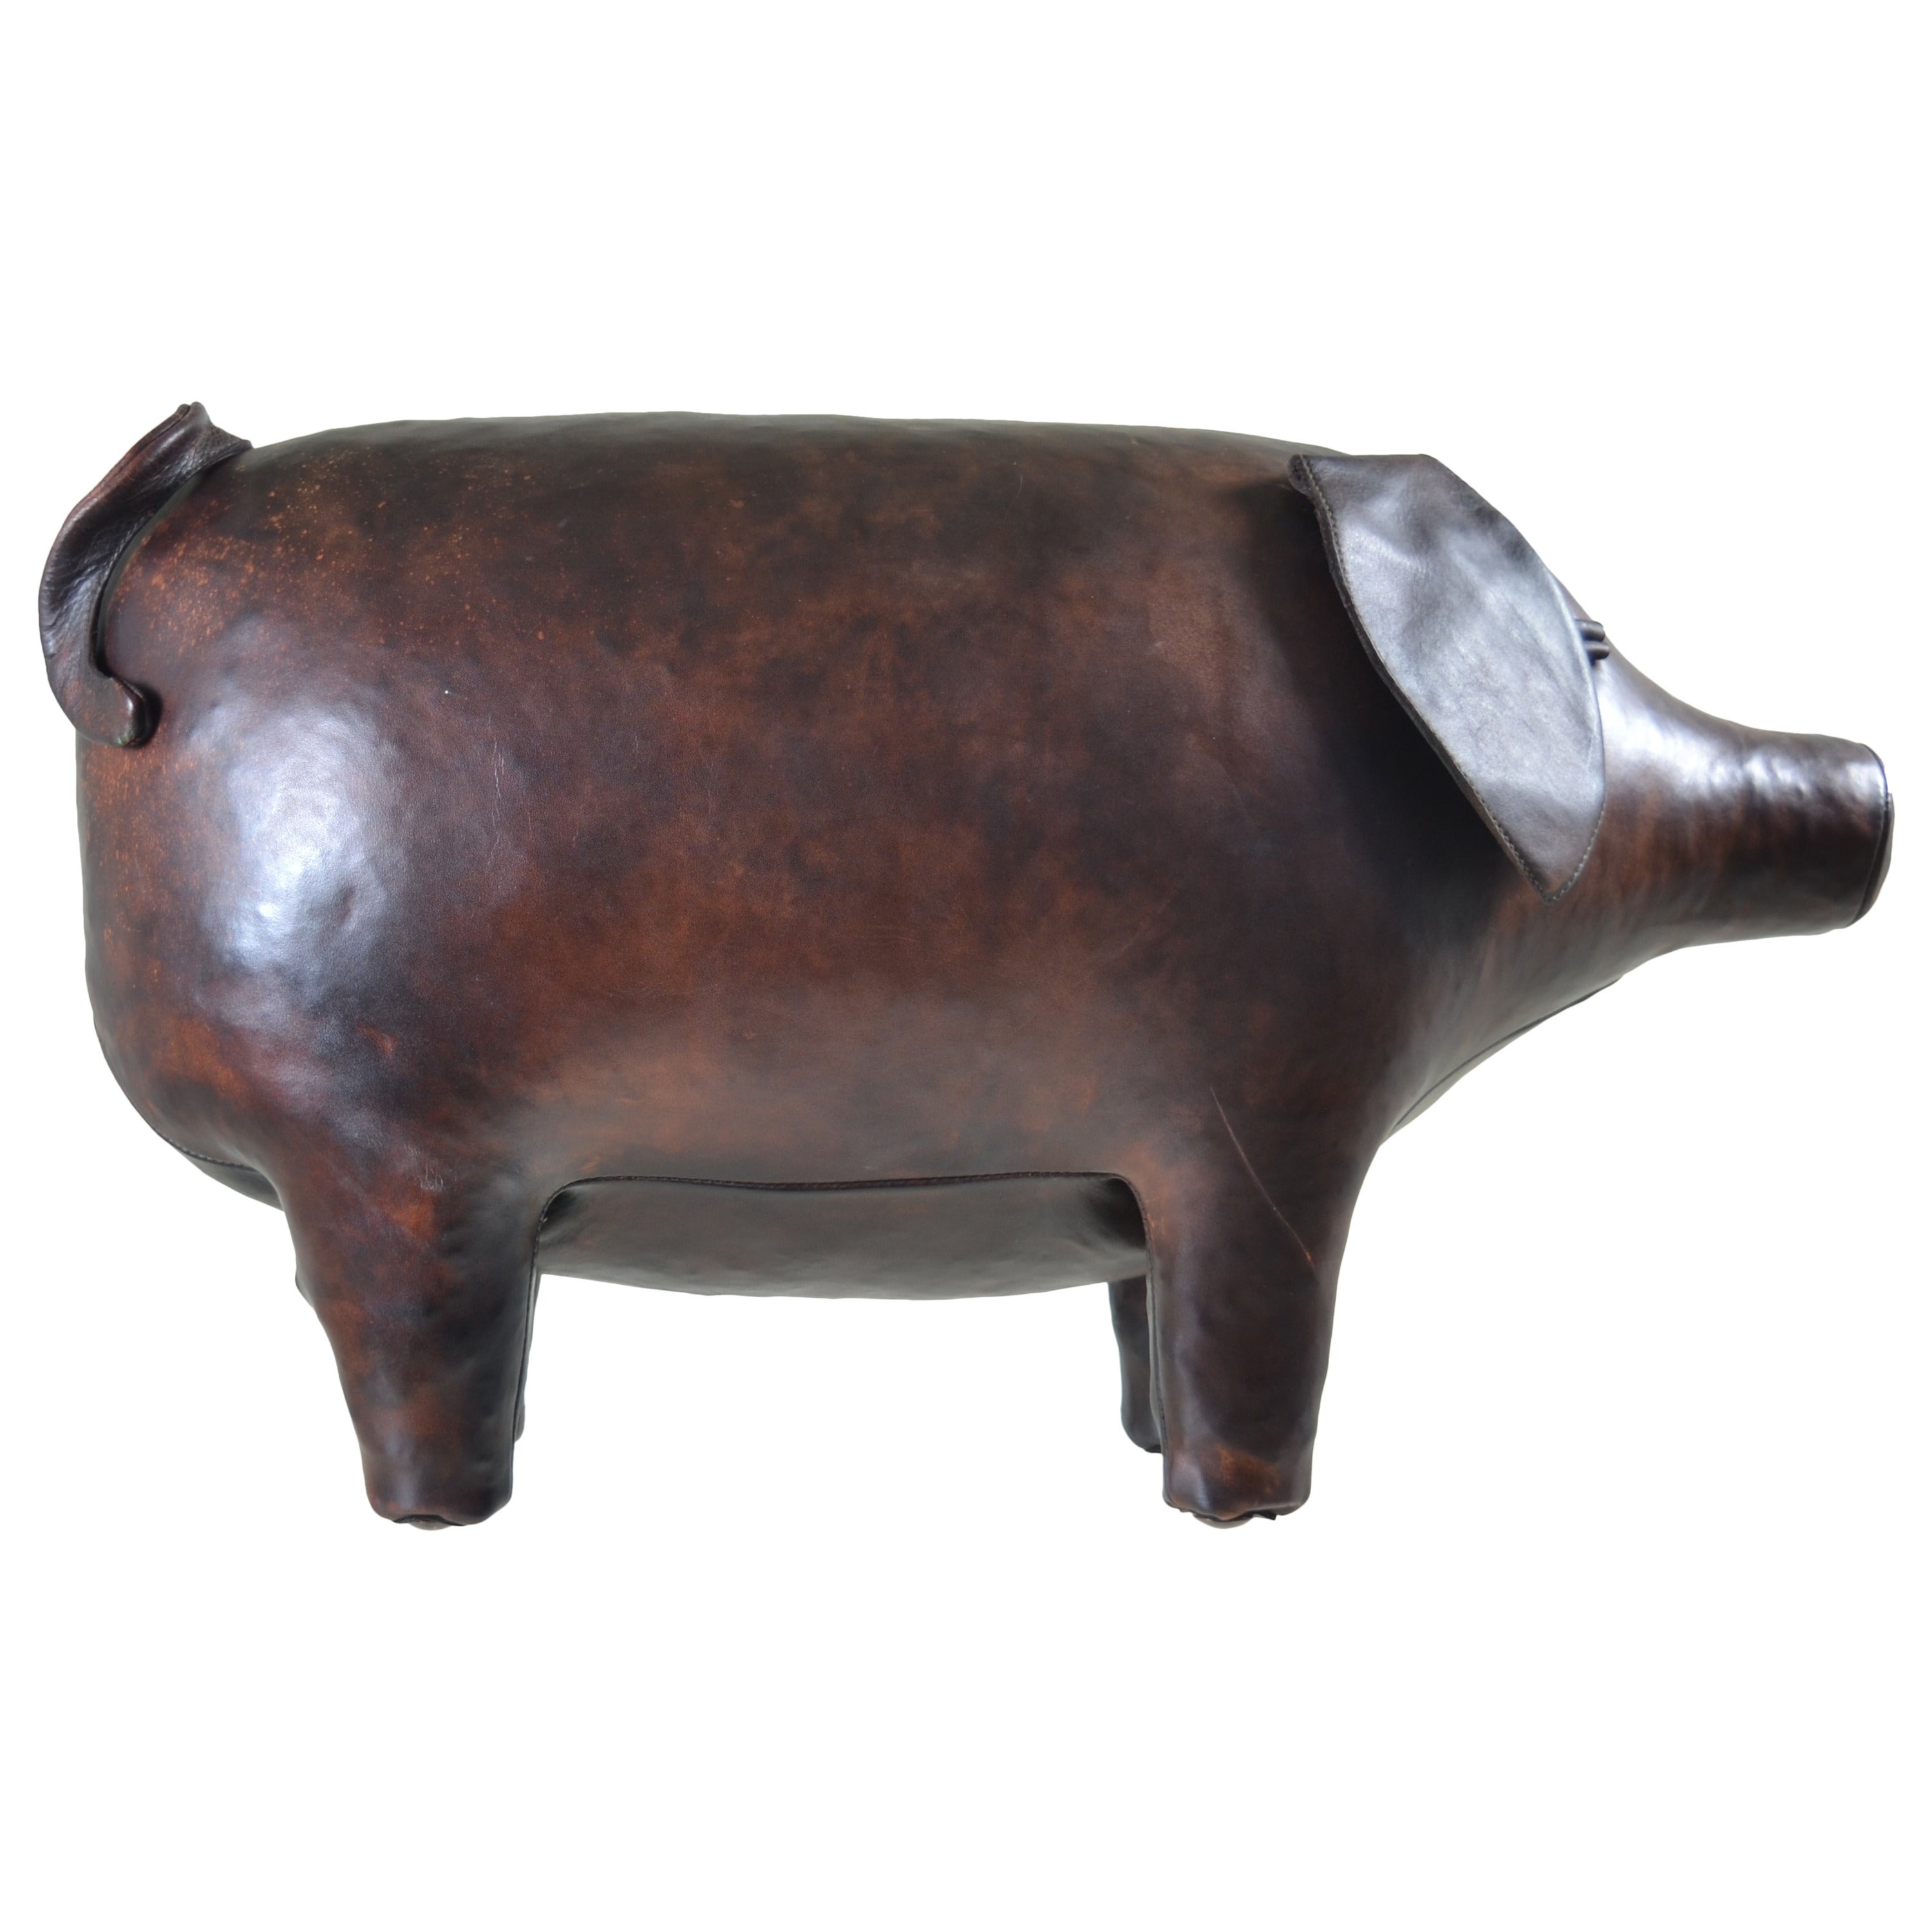 Leather Pig Stool Made by Omersa & Company for Abercrombie & Fitch